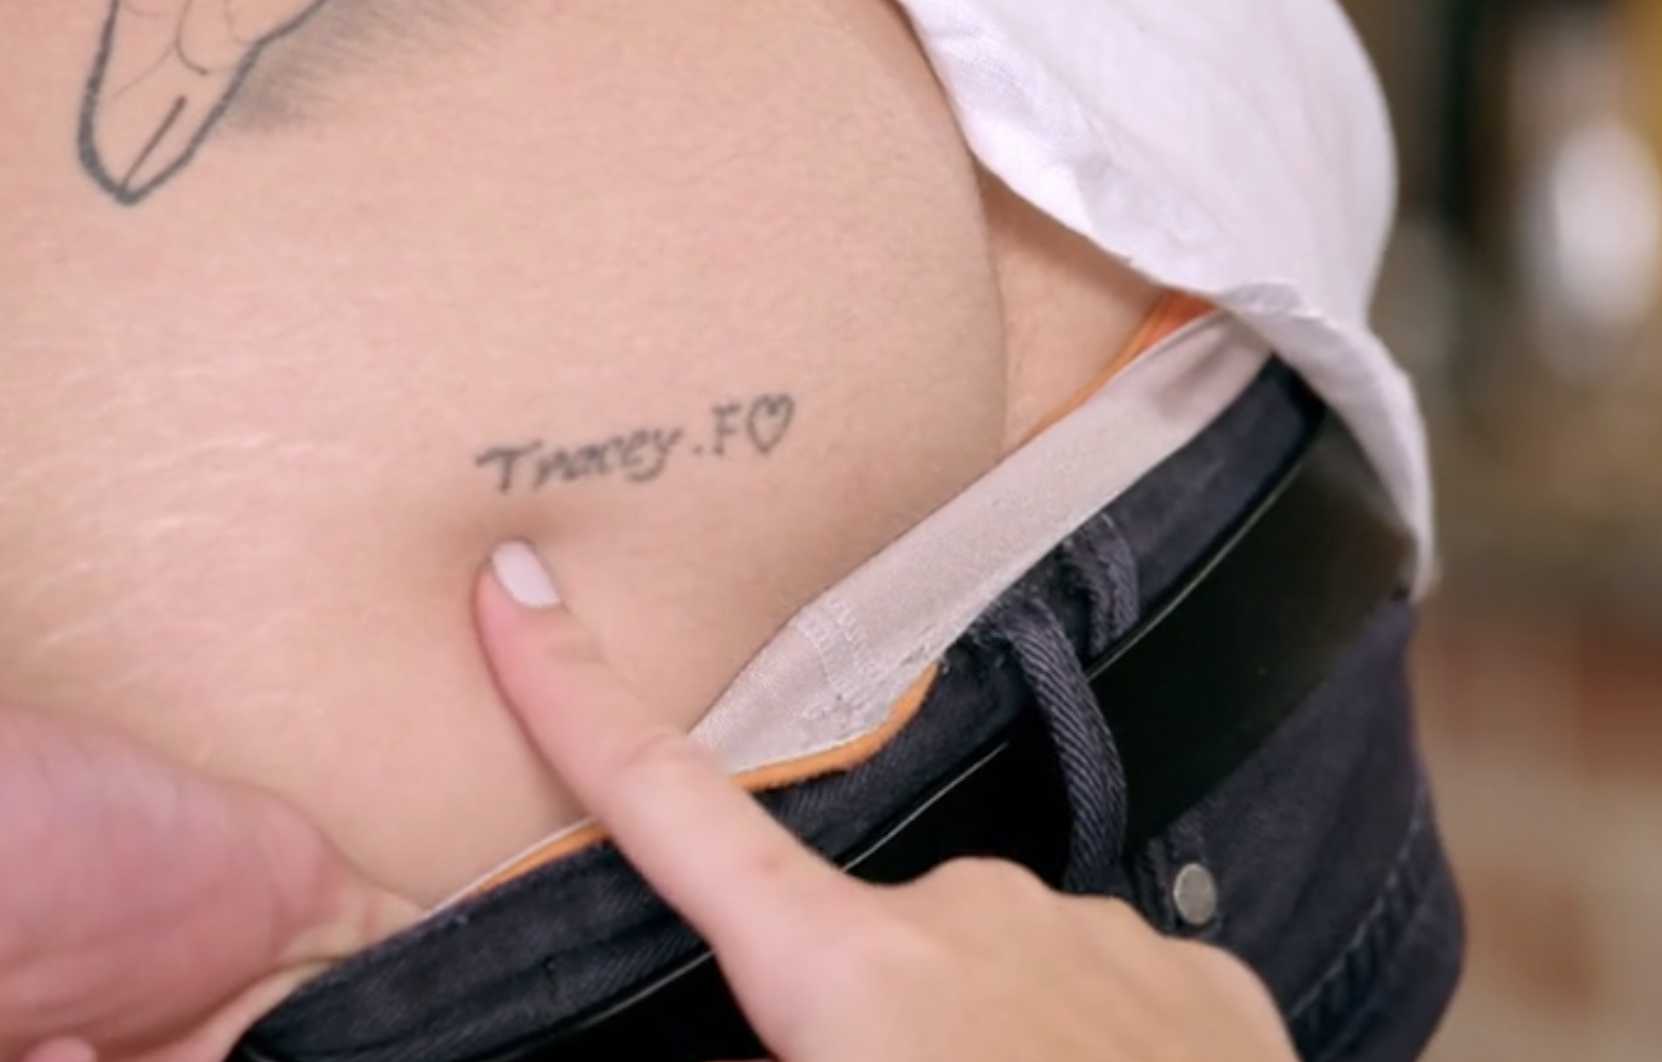 Timm's tattoos on The Bachelorette